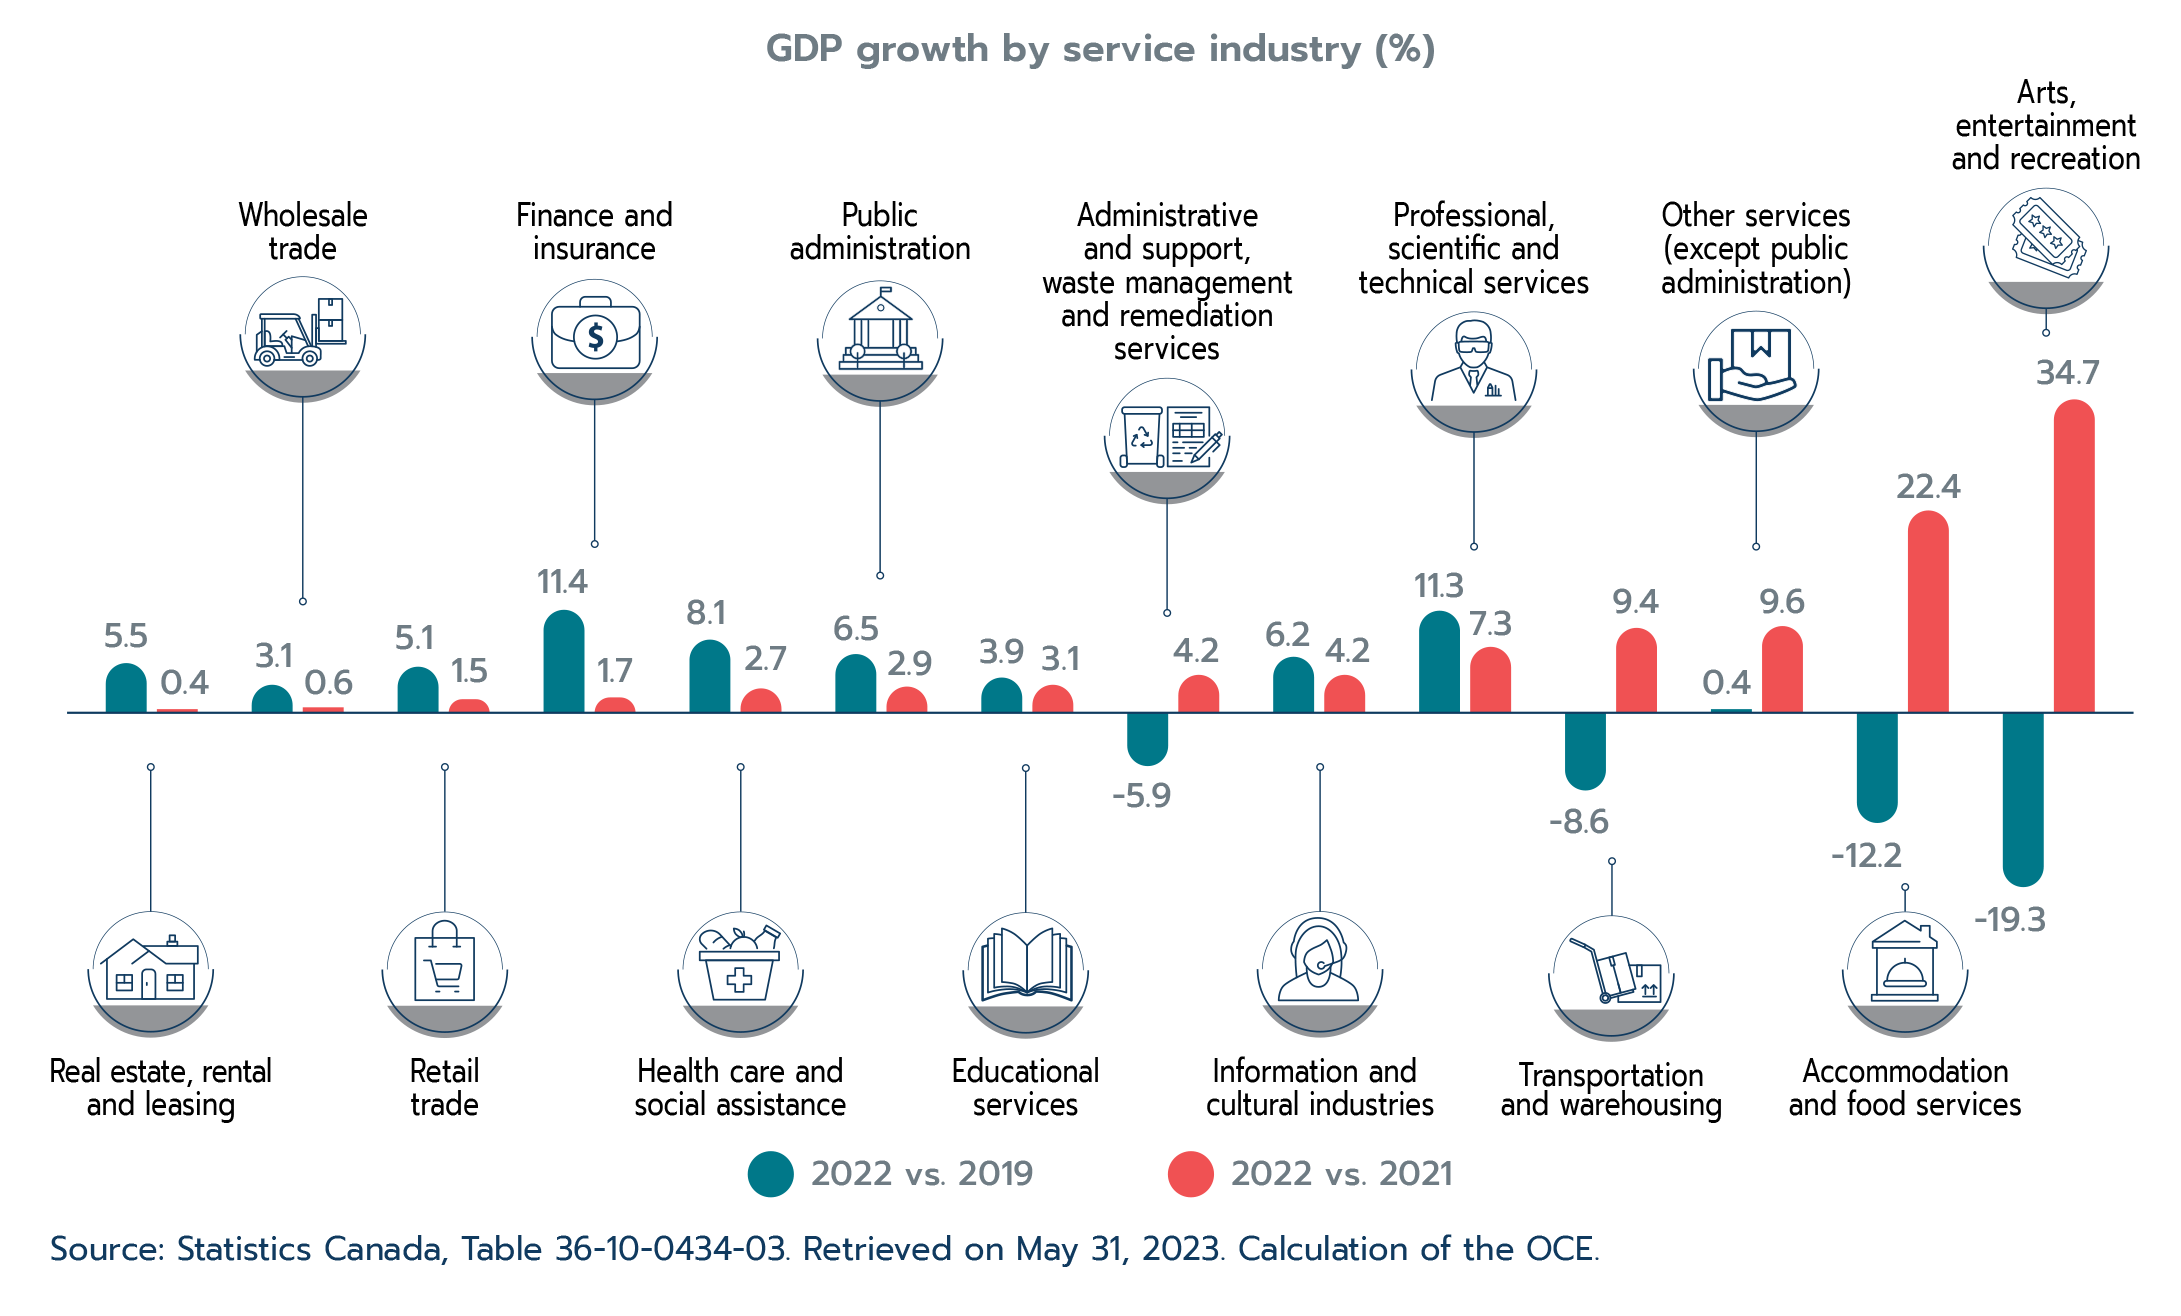 Figure 1.5: Services industries continue their recovery, but several have not reached their pre-pandemic levels